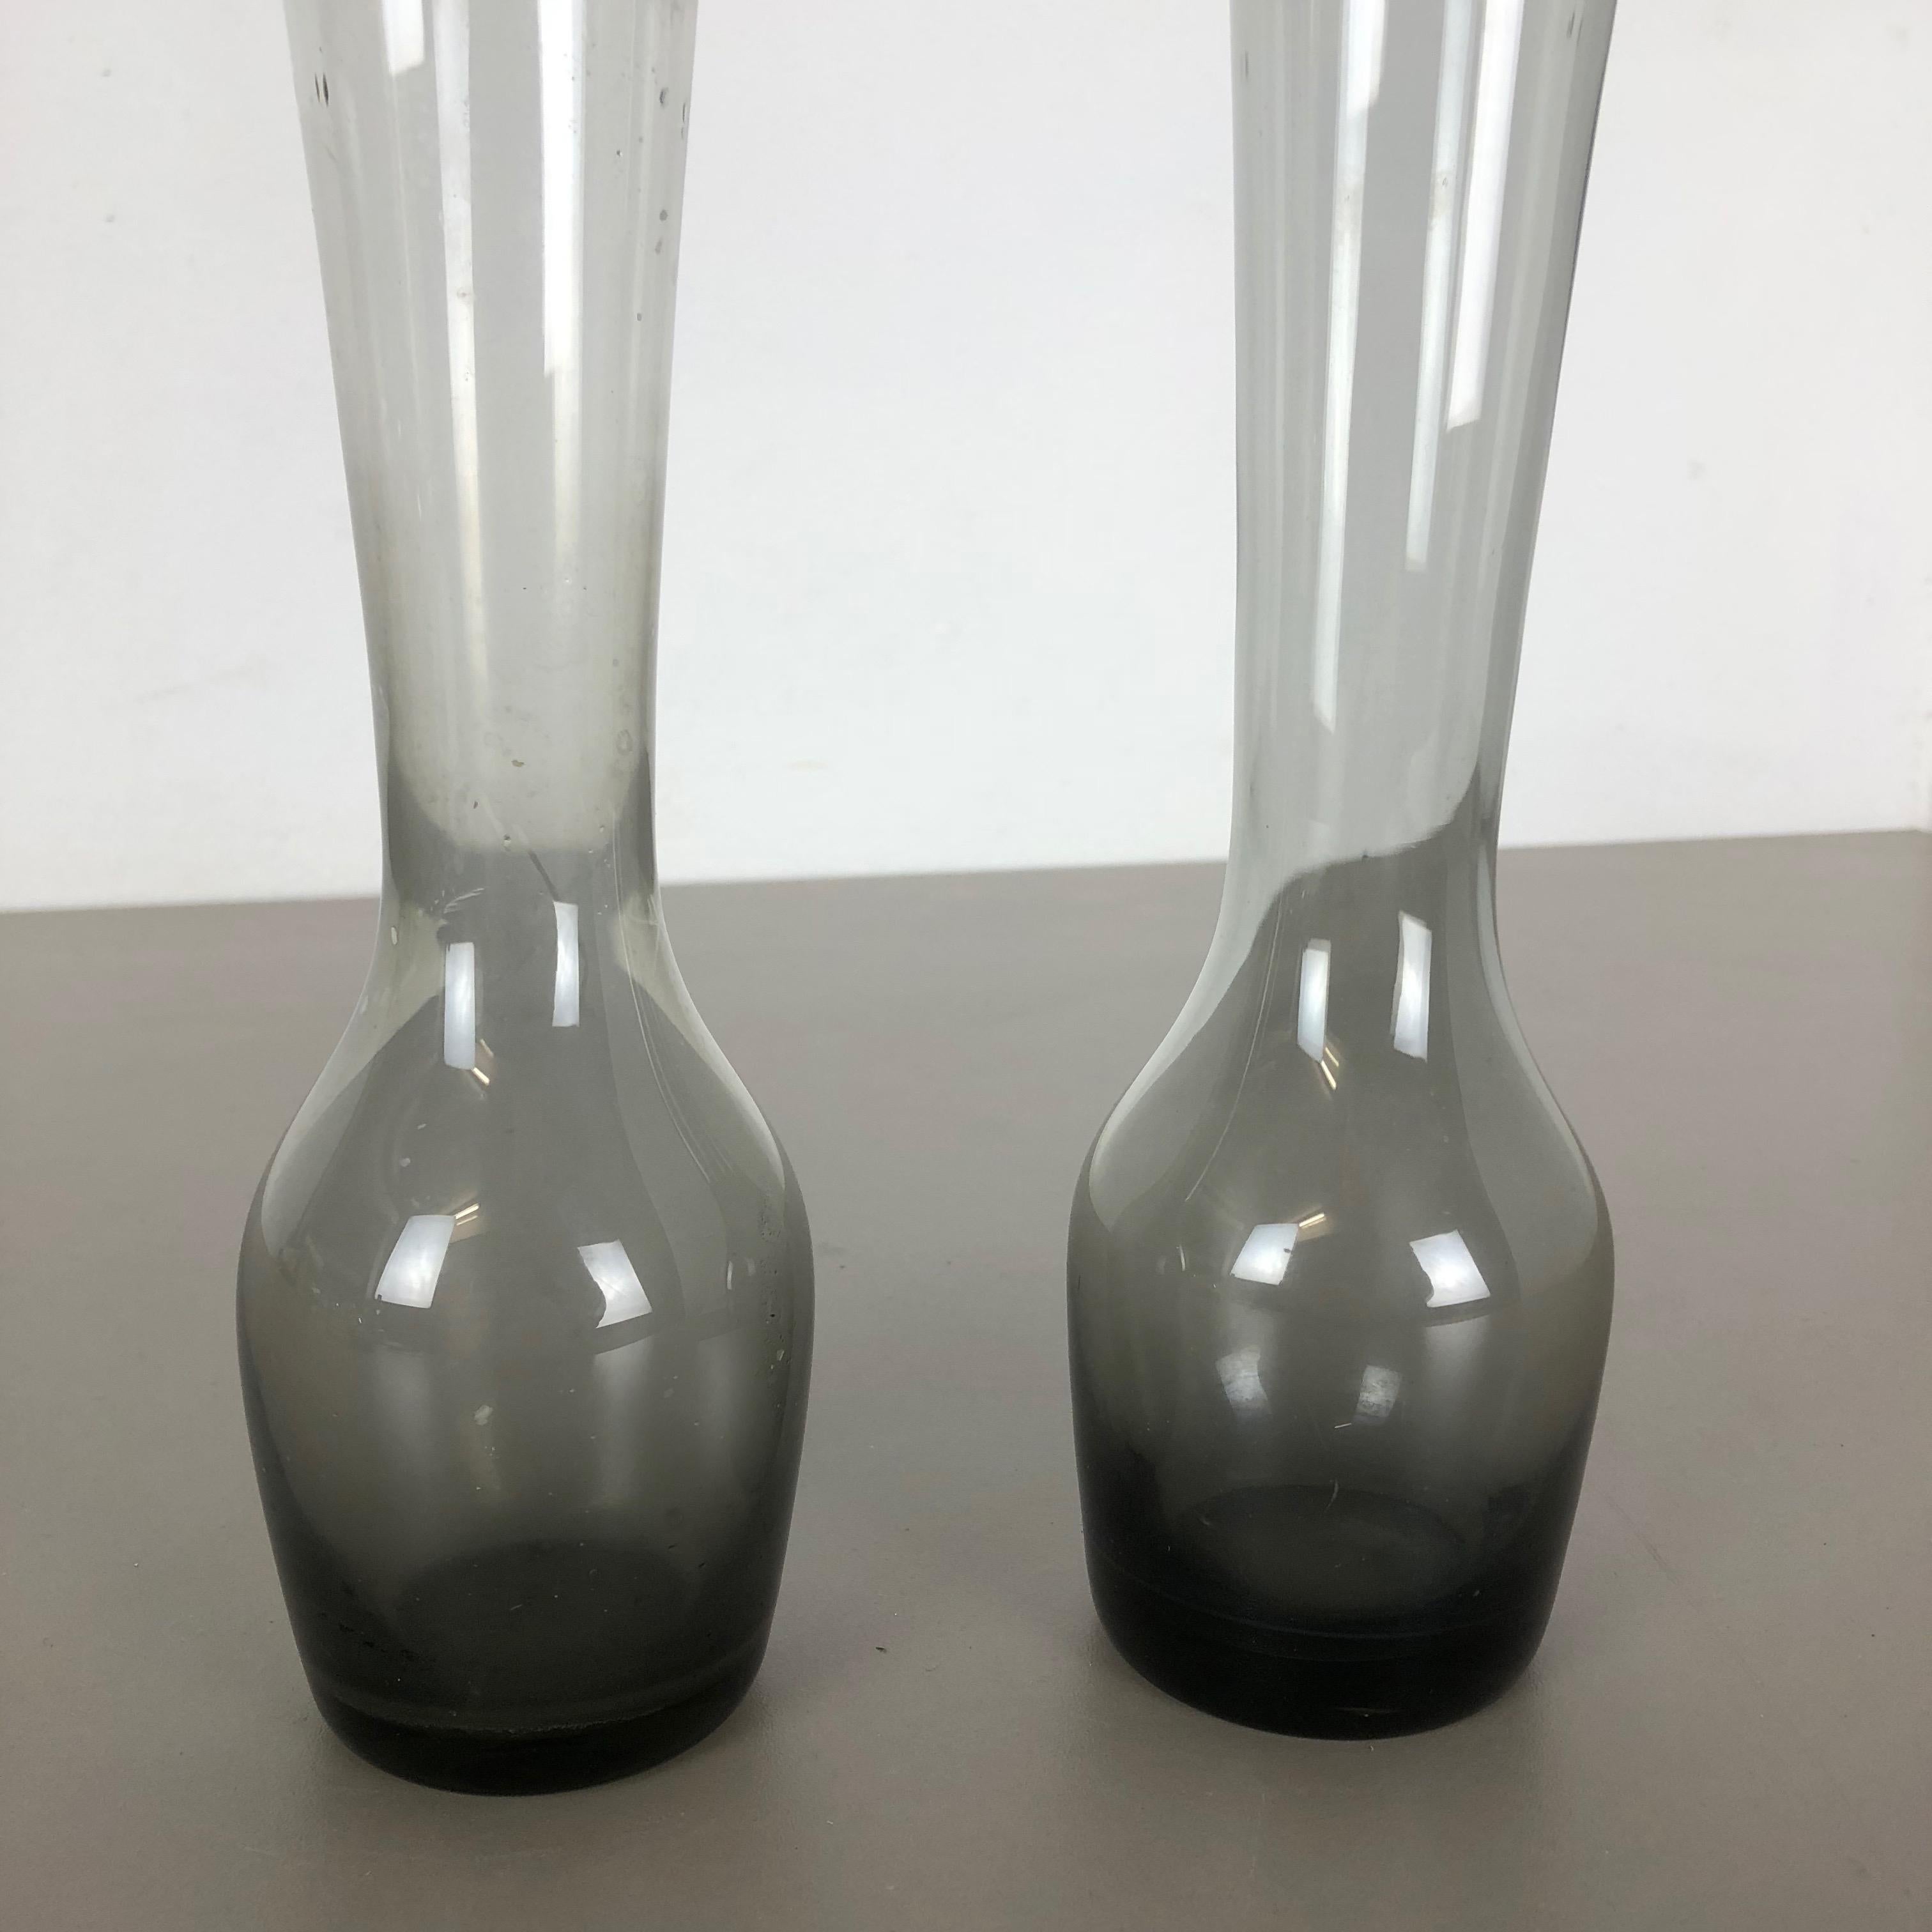 Vintage 1960s Set of 2 Turmalin Vases by Wilhelm Wagenfeld for WMF, Germany For Sale 4